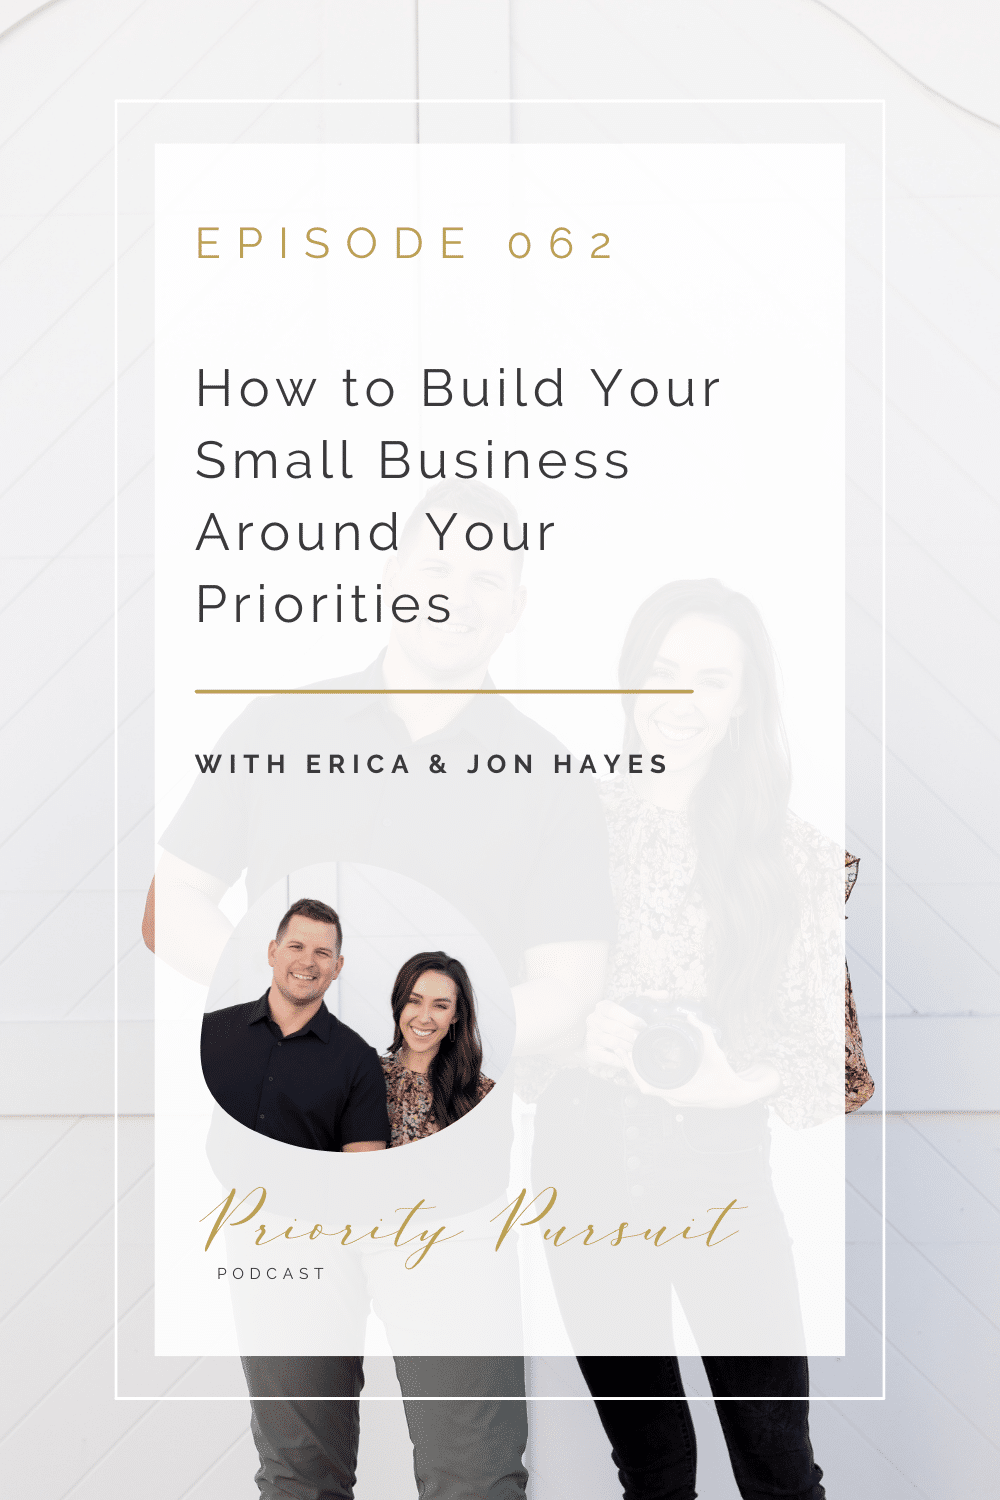 Victoria Rayburn and Erica and Jon Hayes discuss how you can build your small business around your priorities.